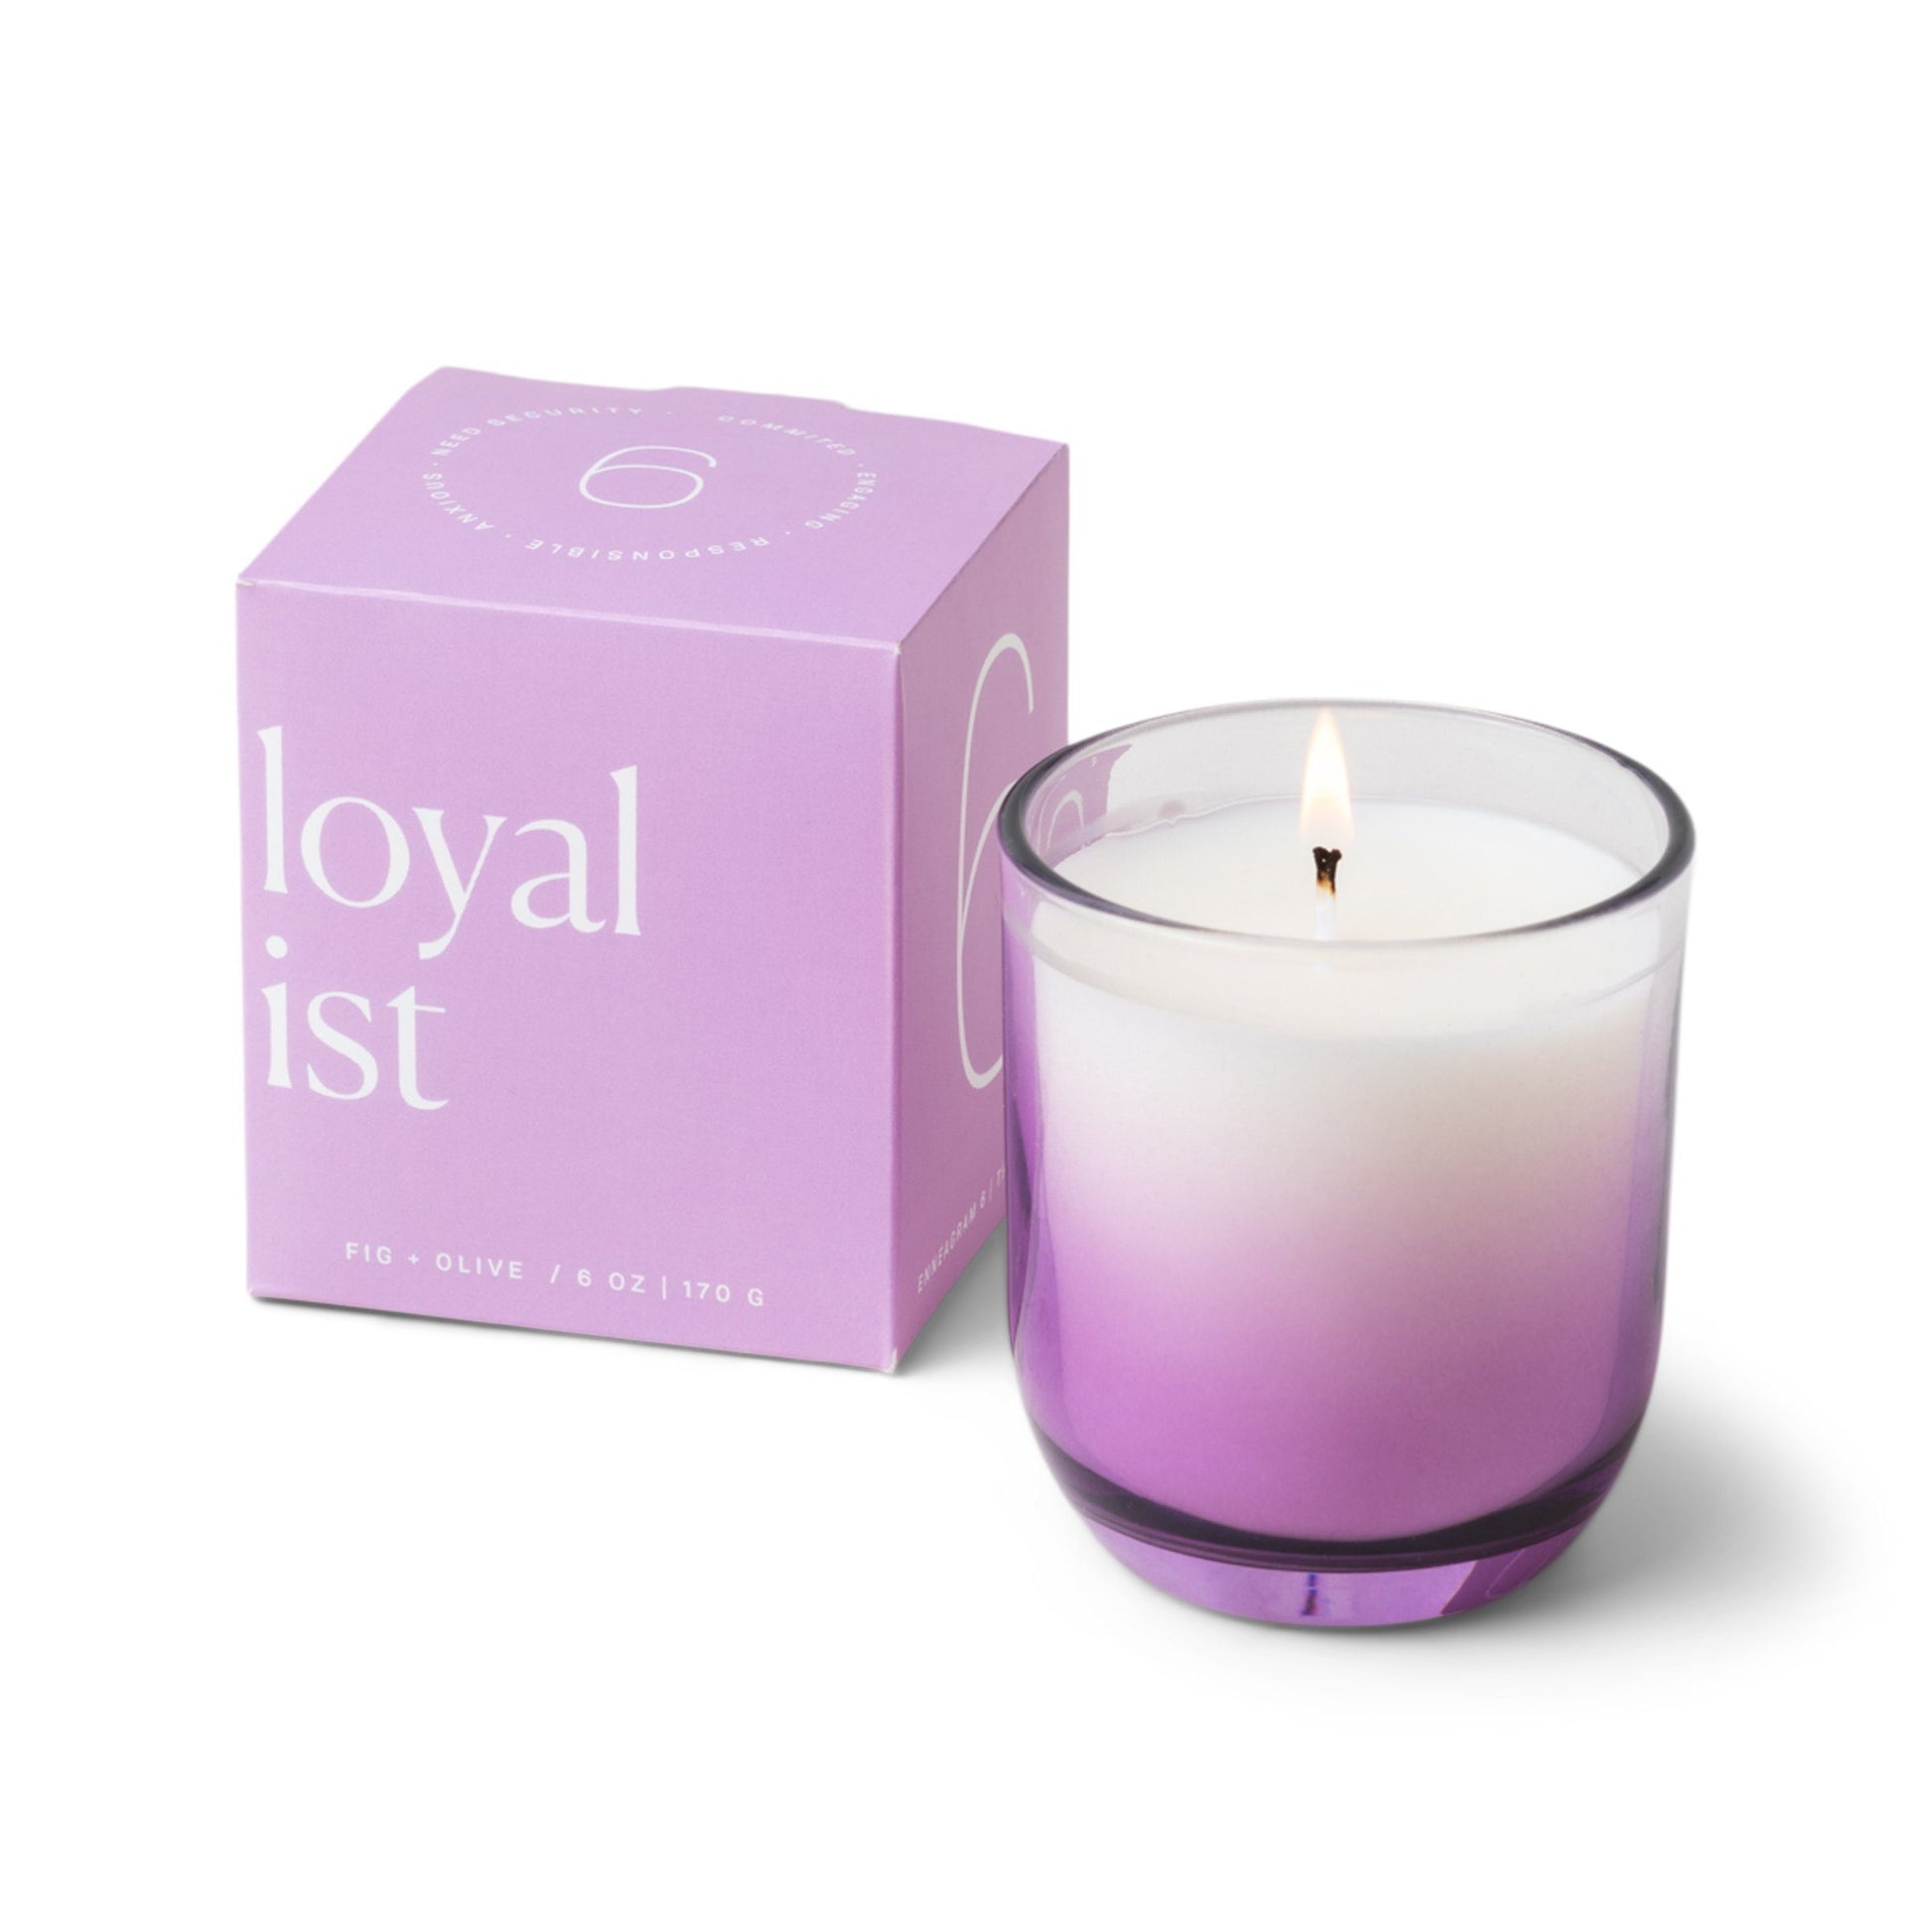 Candle with a vessel of clear glass that fades to purple at the bottom; pictured next to the purple box which reads “loyalist”